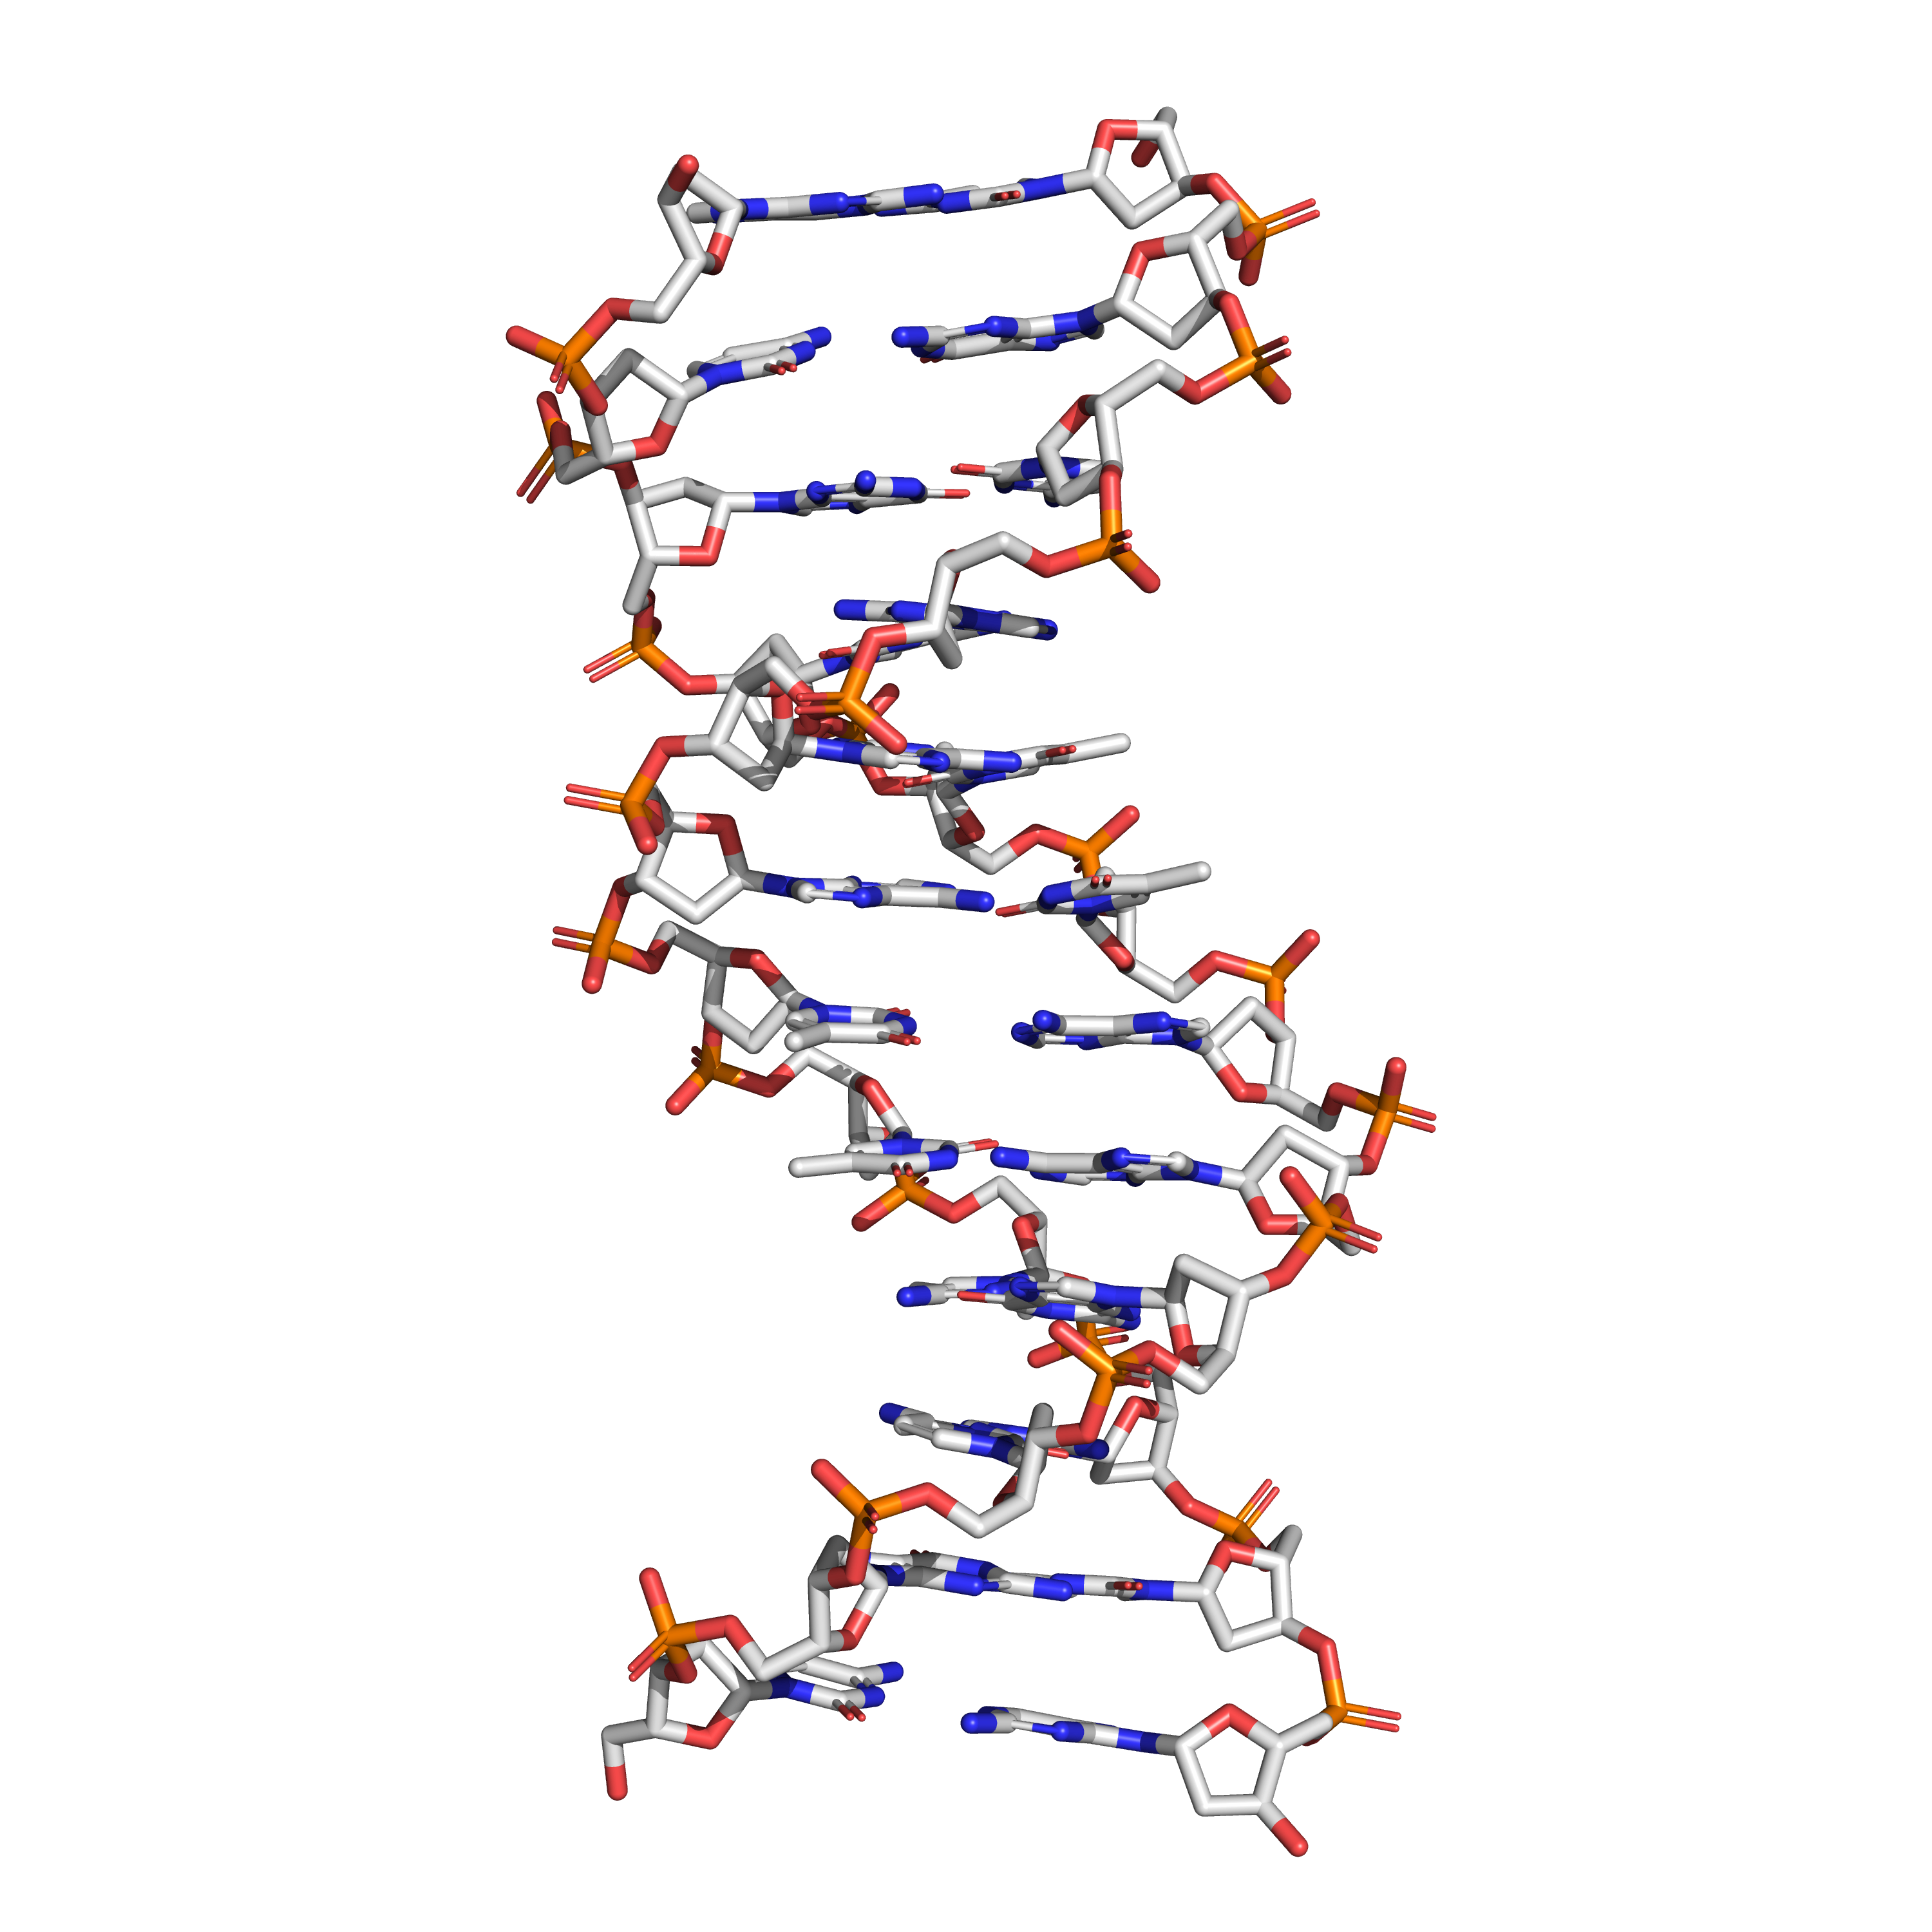 The structure of the DNA double helix. A section of DNA. The bases lie horizontally between the two spiraling strands. The atoms in the structure are colour-coded by element (based on atomic coordinates of PDB 1bna rendered with open source molecular visualization tool PyMol.)